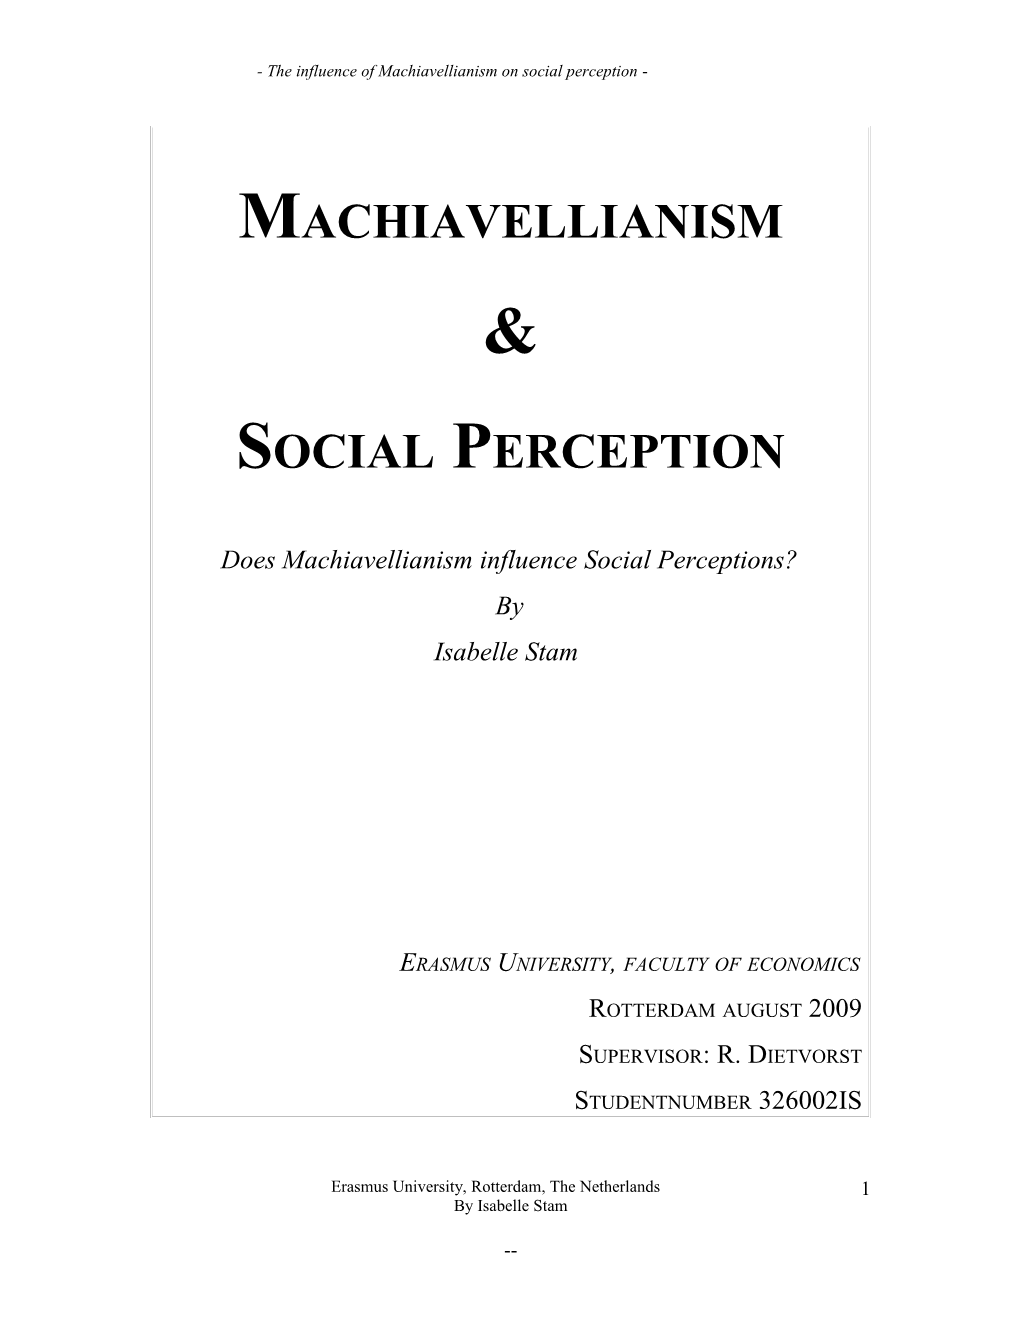 the Influence of Machiavellianism on Social Perception